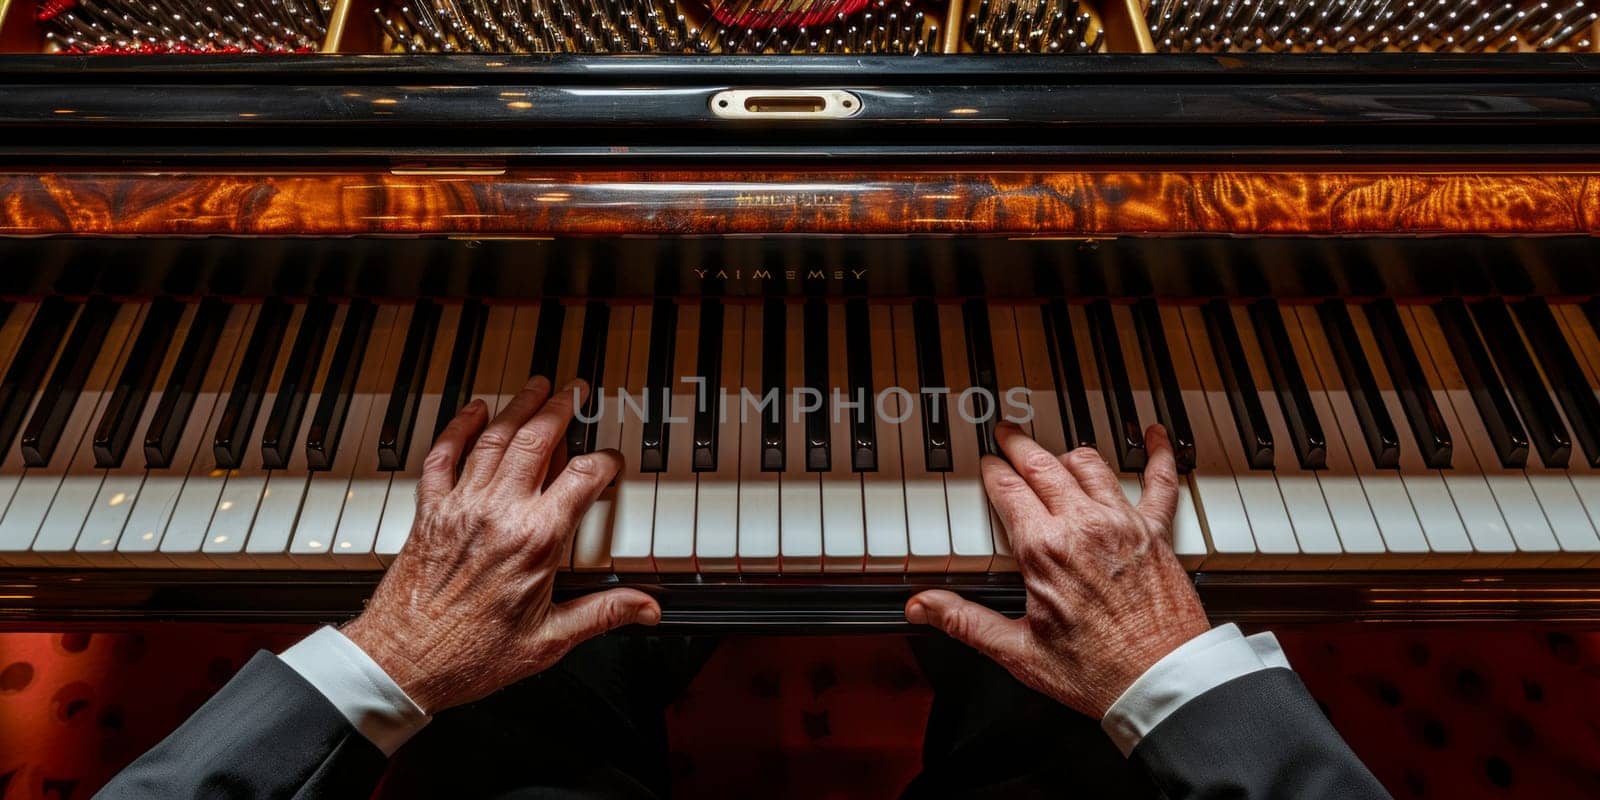 A man in a stylish suit passionately playing a grand piano, his fingers elegantly dancing across the keys, creating beautiful music by but_photo